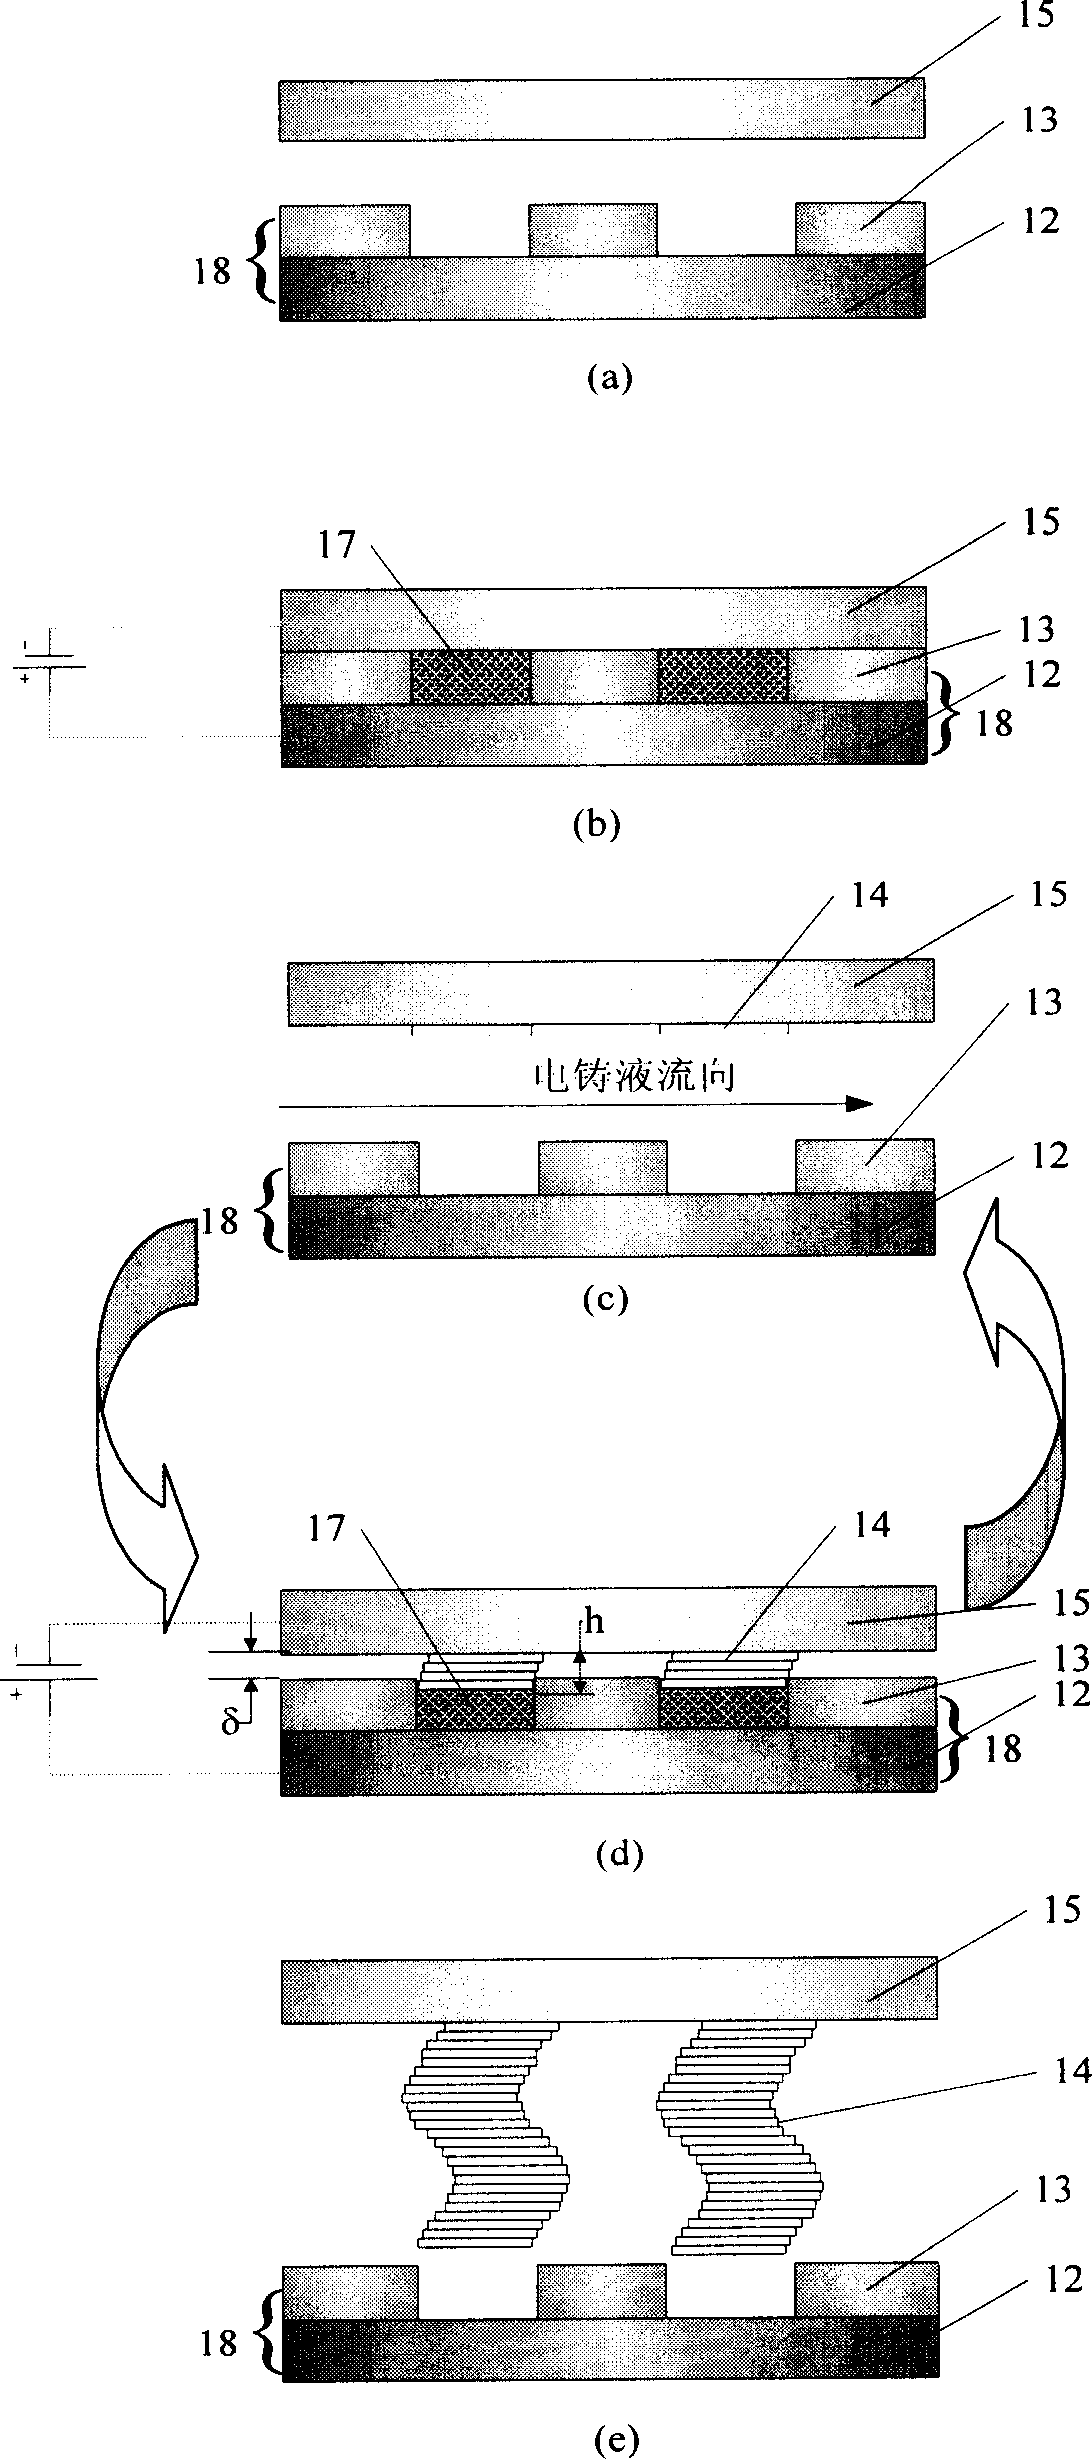 Three-dimensional microstructure electroforming method and apparatus